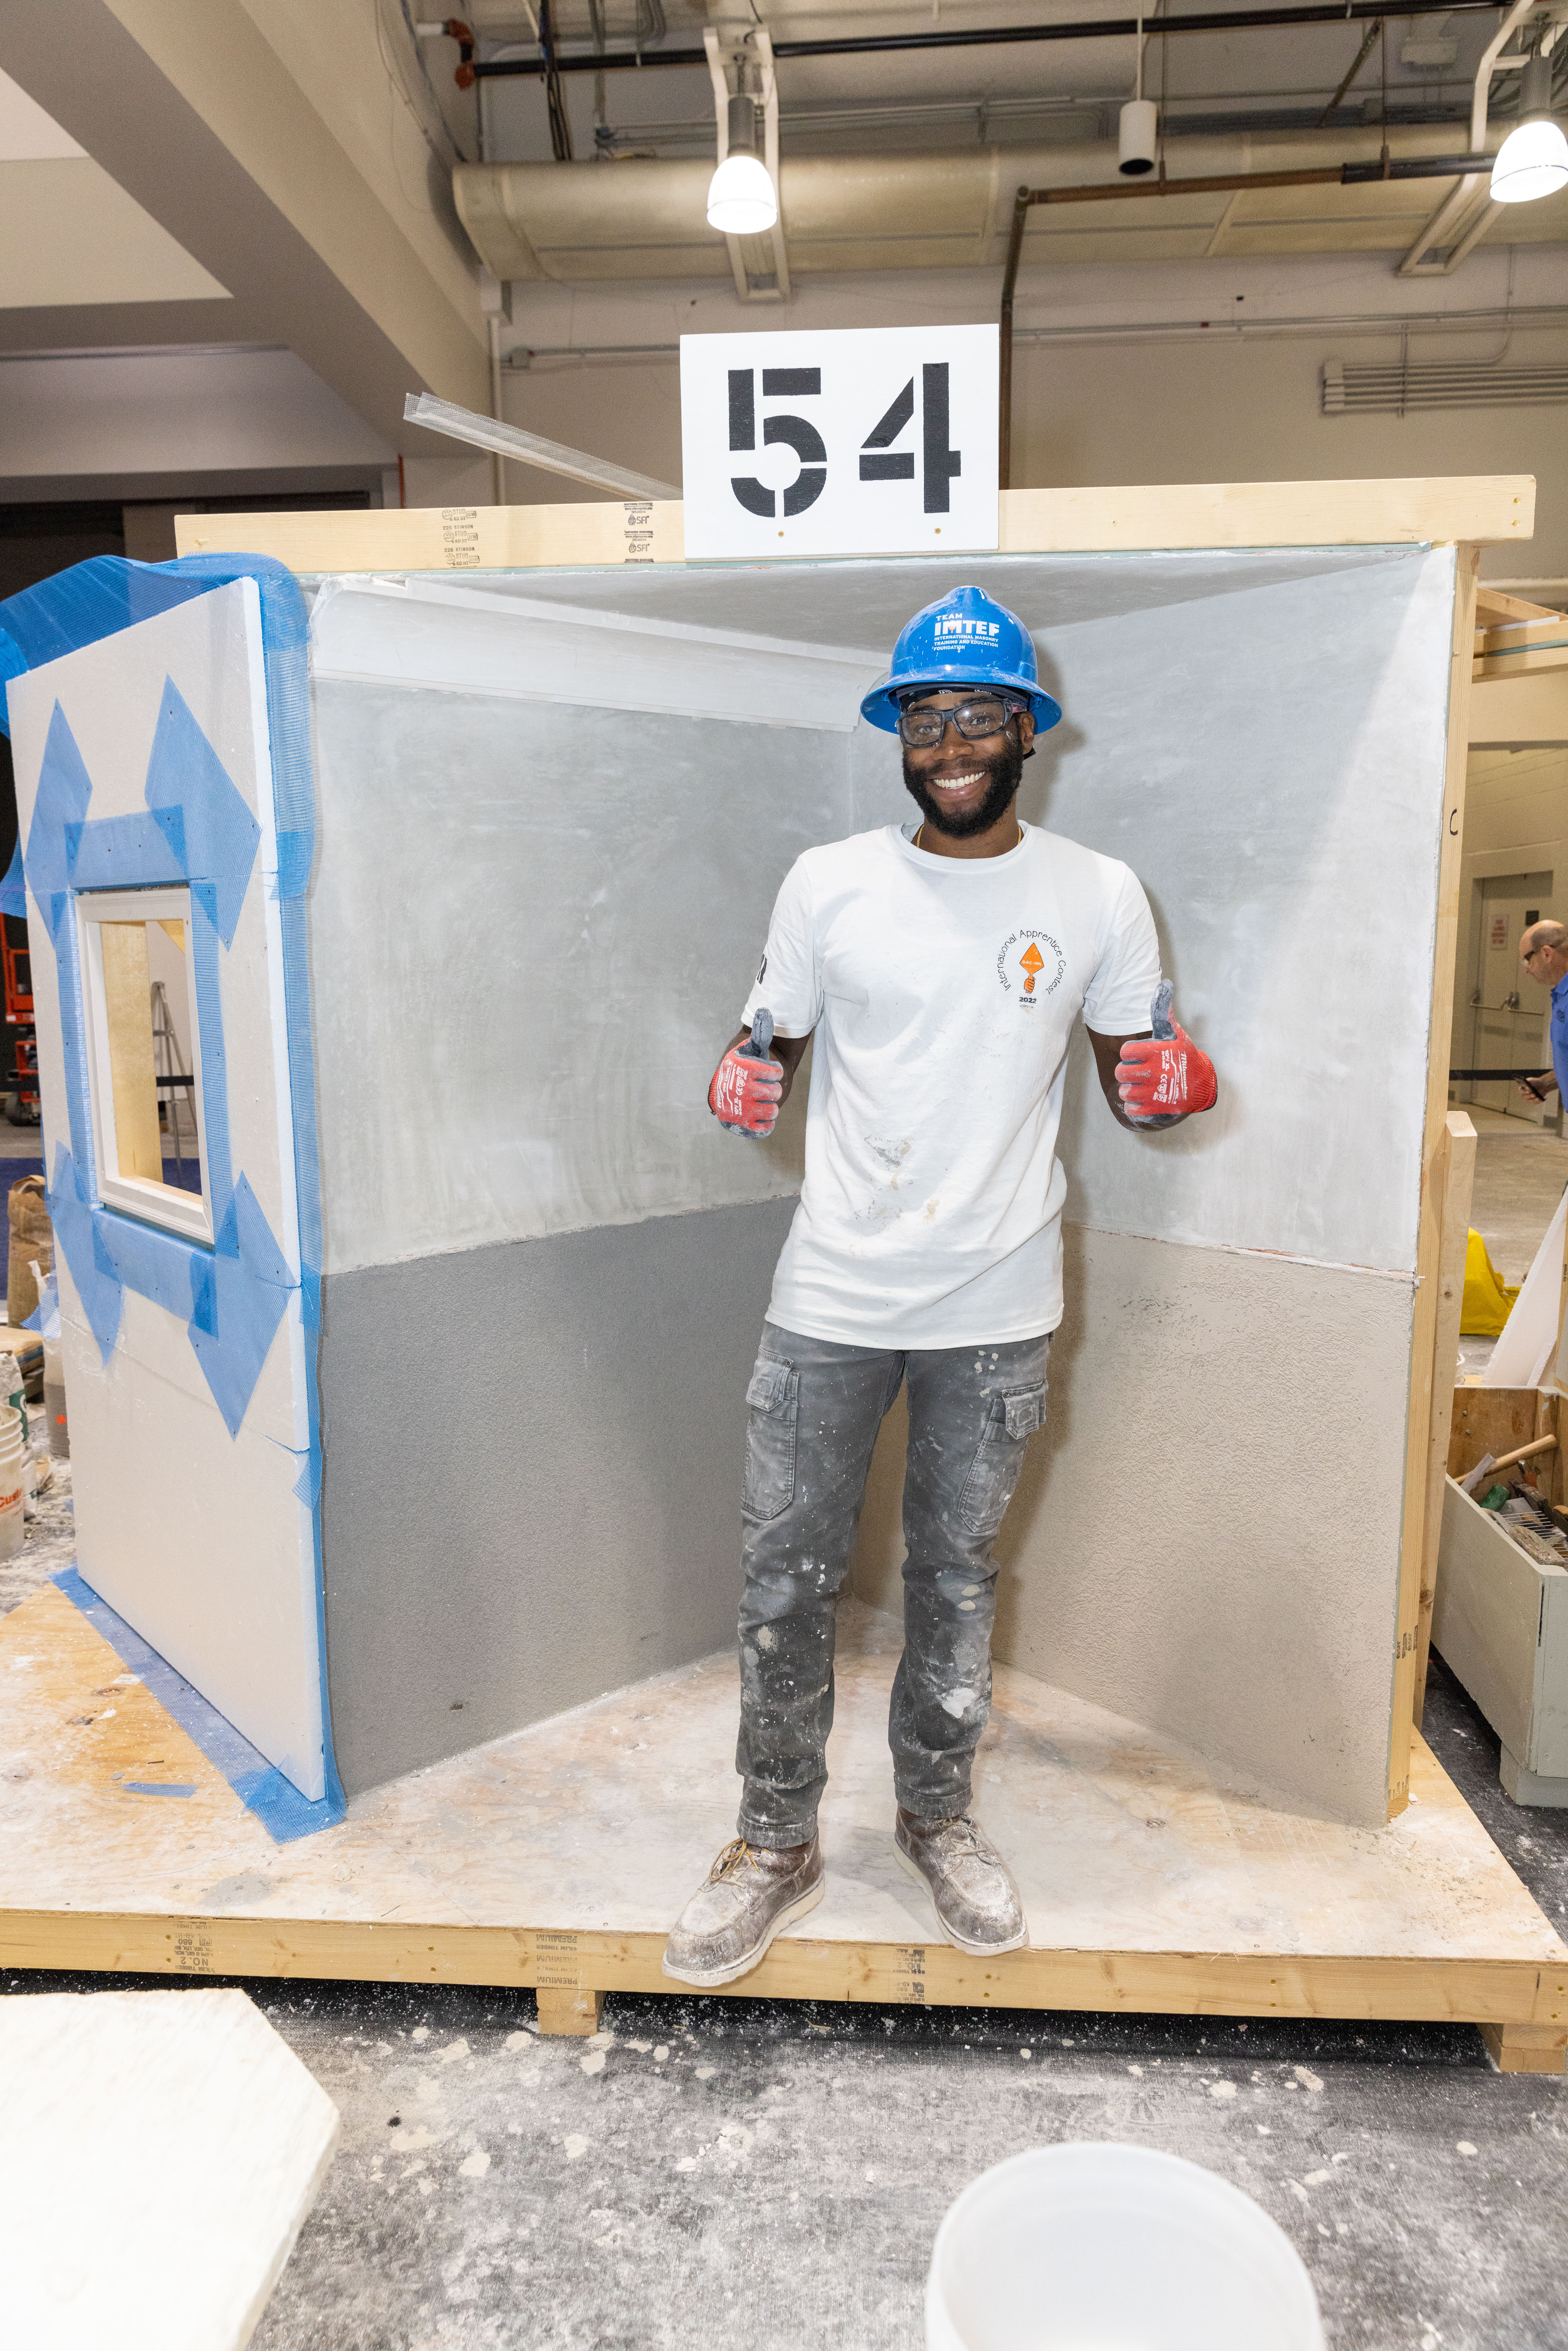 Local 1 New York Plaster apprentice Cameron Holder placed third at the International Apprentice Contest.